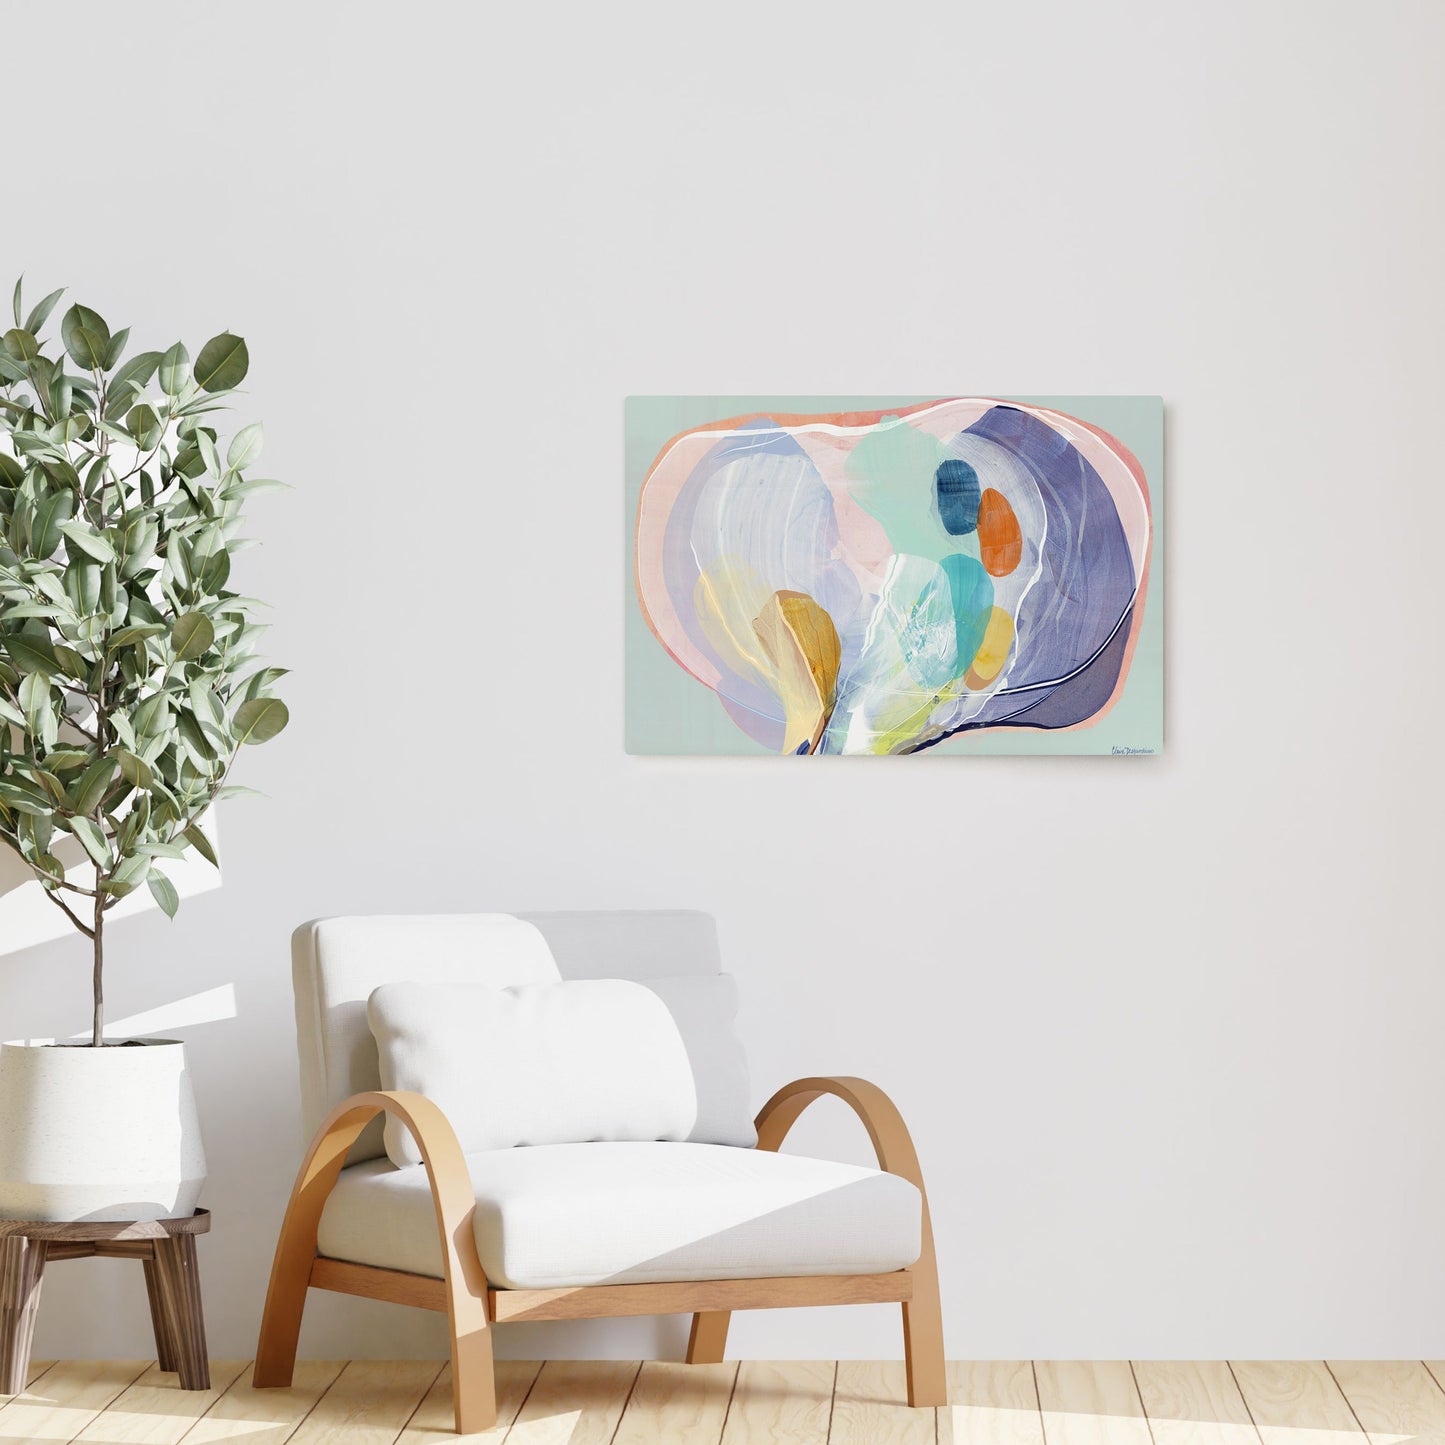 Claire Desjardins' Moving in Silence painting reproduced on HD metal print and displayed on wall